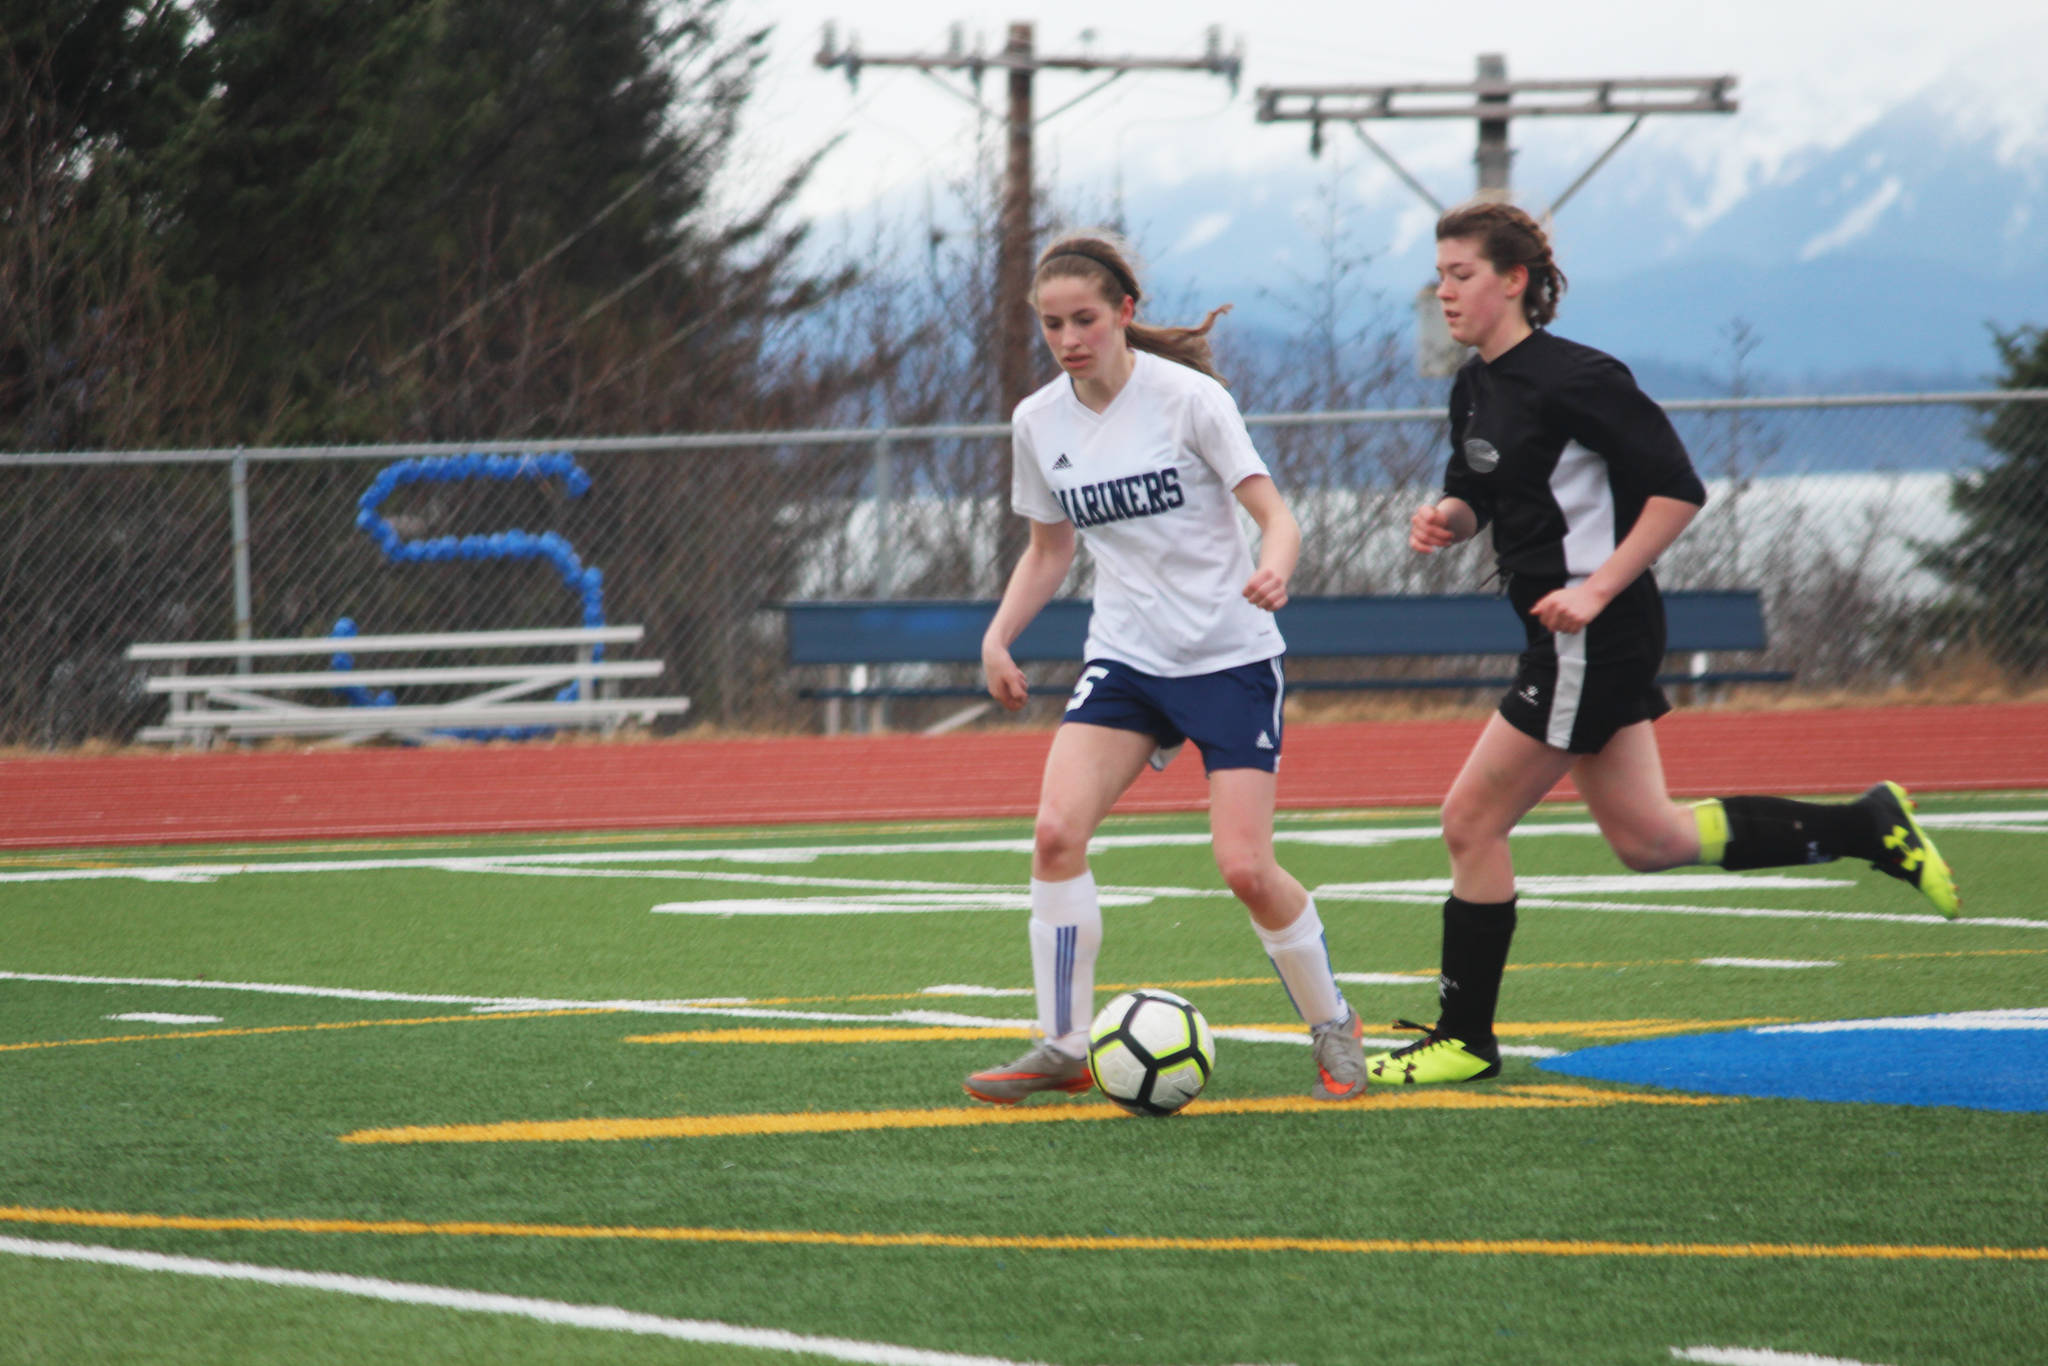 Homer’s Laura Inama keeps the ball away from a Nikiski player during the varsity girls game at home Tuesday, April 17, 2018 in Homer, Alaska. The Mariners swept the Bulldogs 3-0. (Photo by Megan Pacer/Homer News)